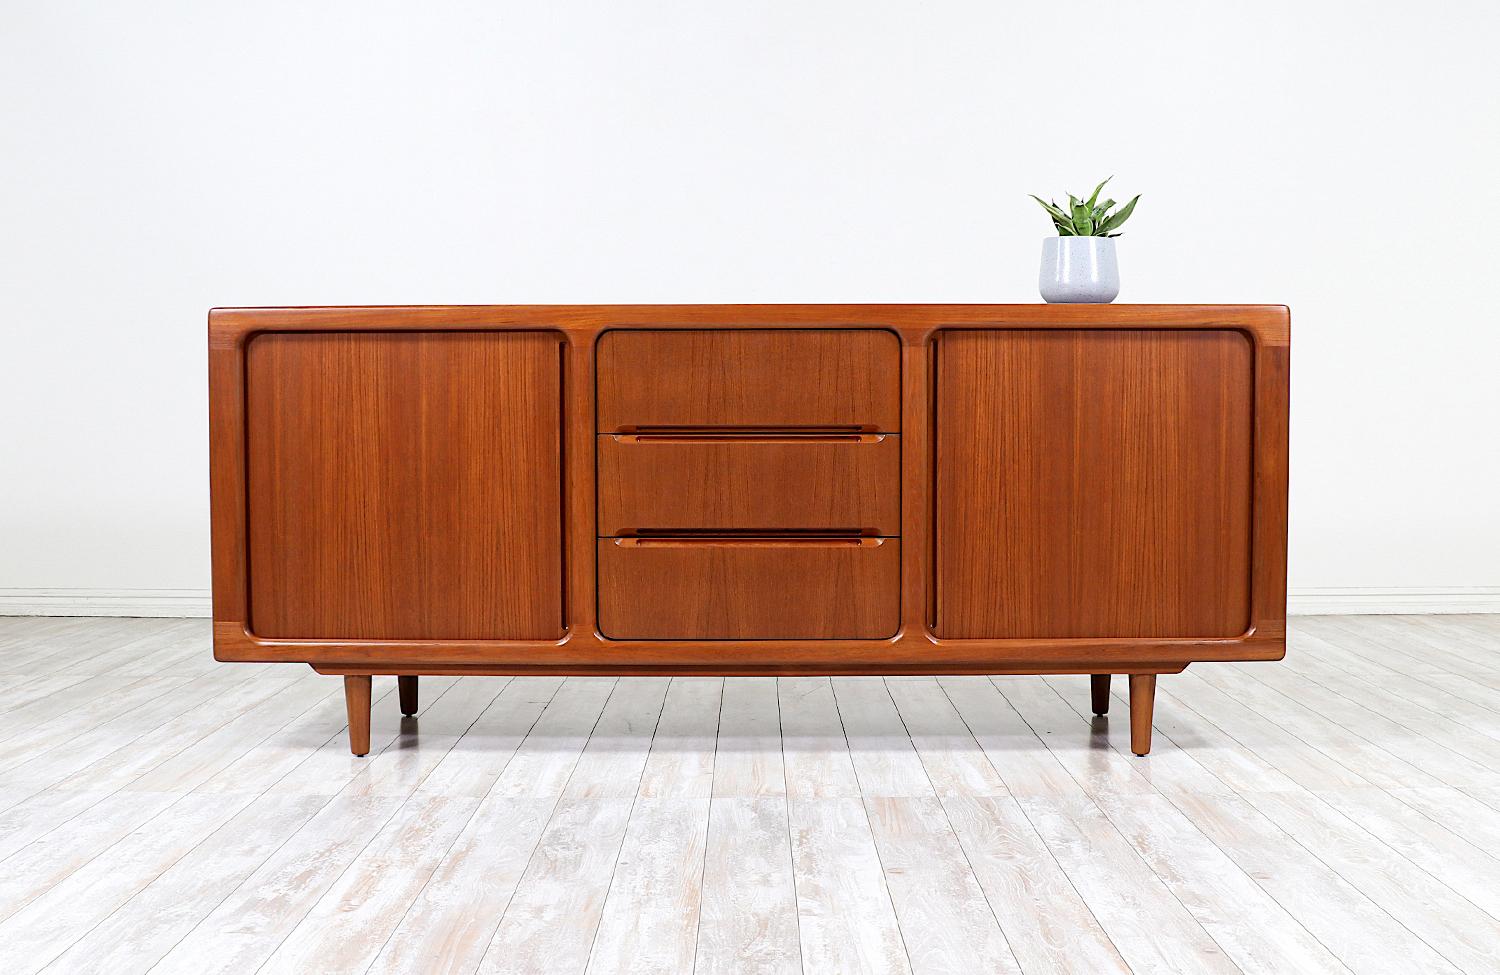 Danish Modern tambour-door credenza designed and manufactured by Dyrlund in Denmark in the 1960s. This classic Danish Modern and functional design features a solid teak wood frame with tapered legs and gorgeous tambour doors with carved handles. The